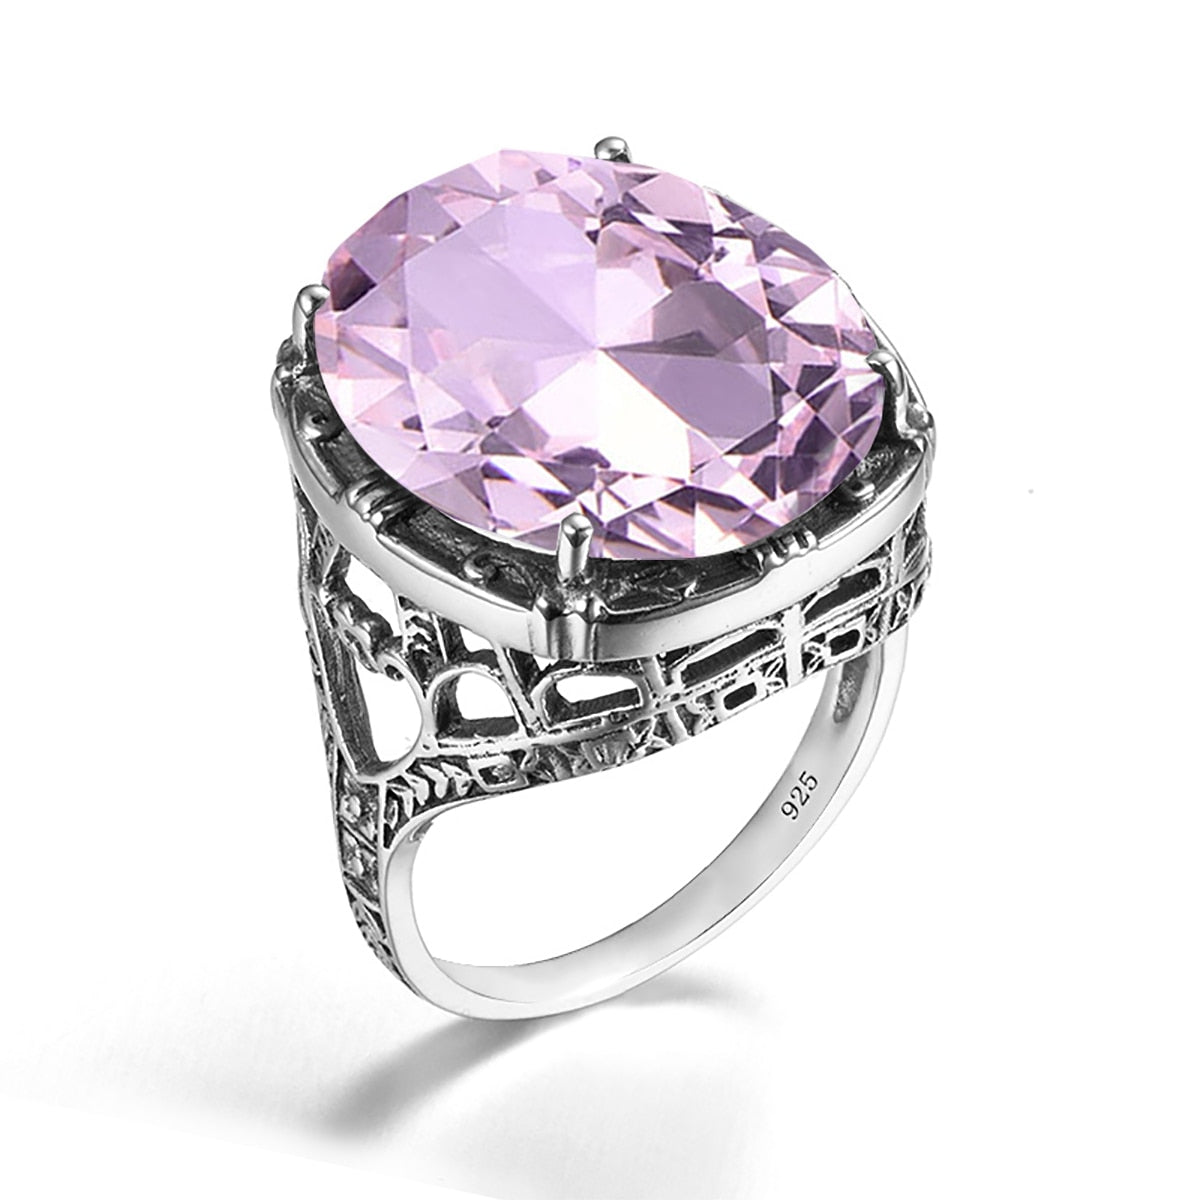 Real 925 Silver Women Amethyst Gemstone Ring Wedding Rings Handmade Processing Victorian Antique Jewelry Pink Stone